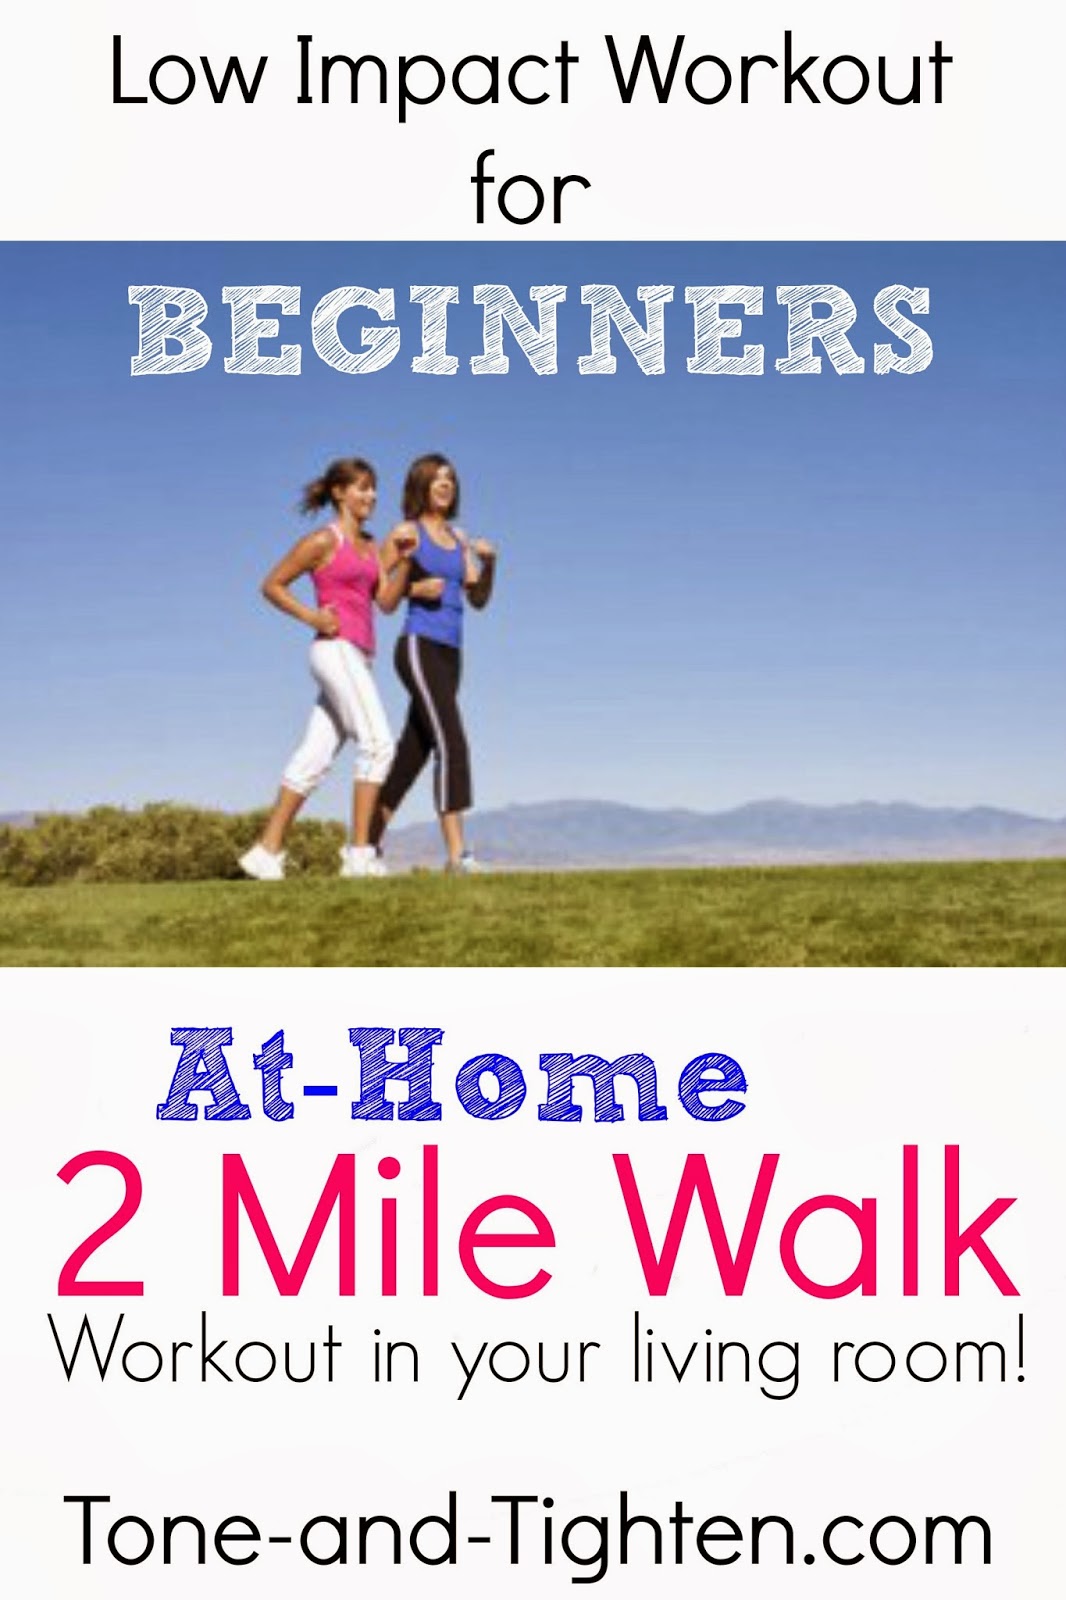 Low Impact Workout for Beginners: At Home 2 Mile Walk